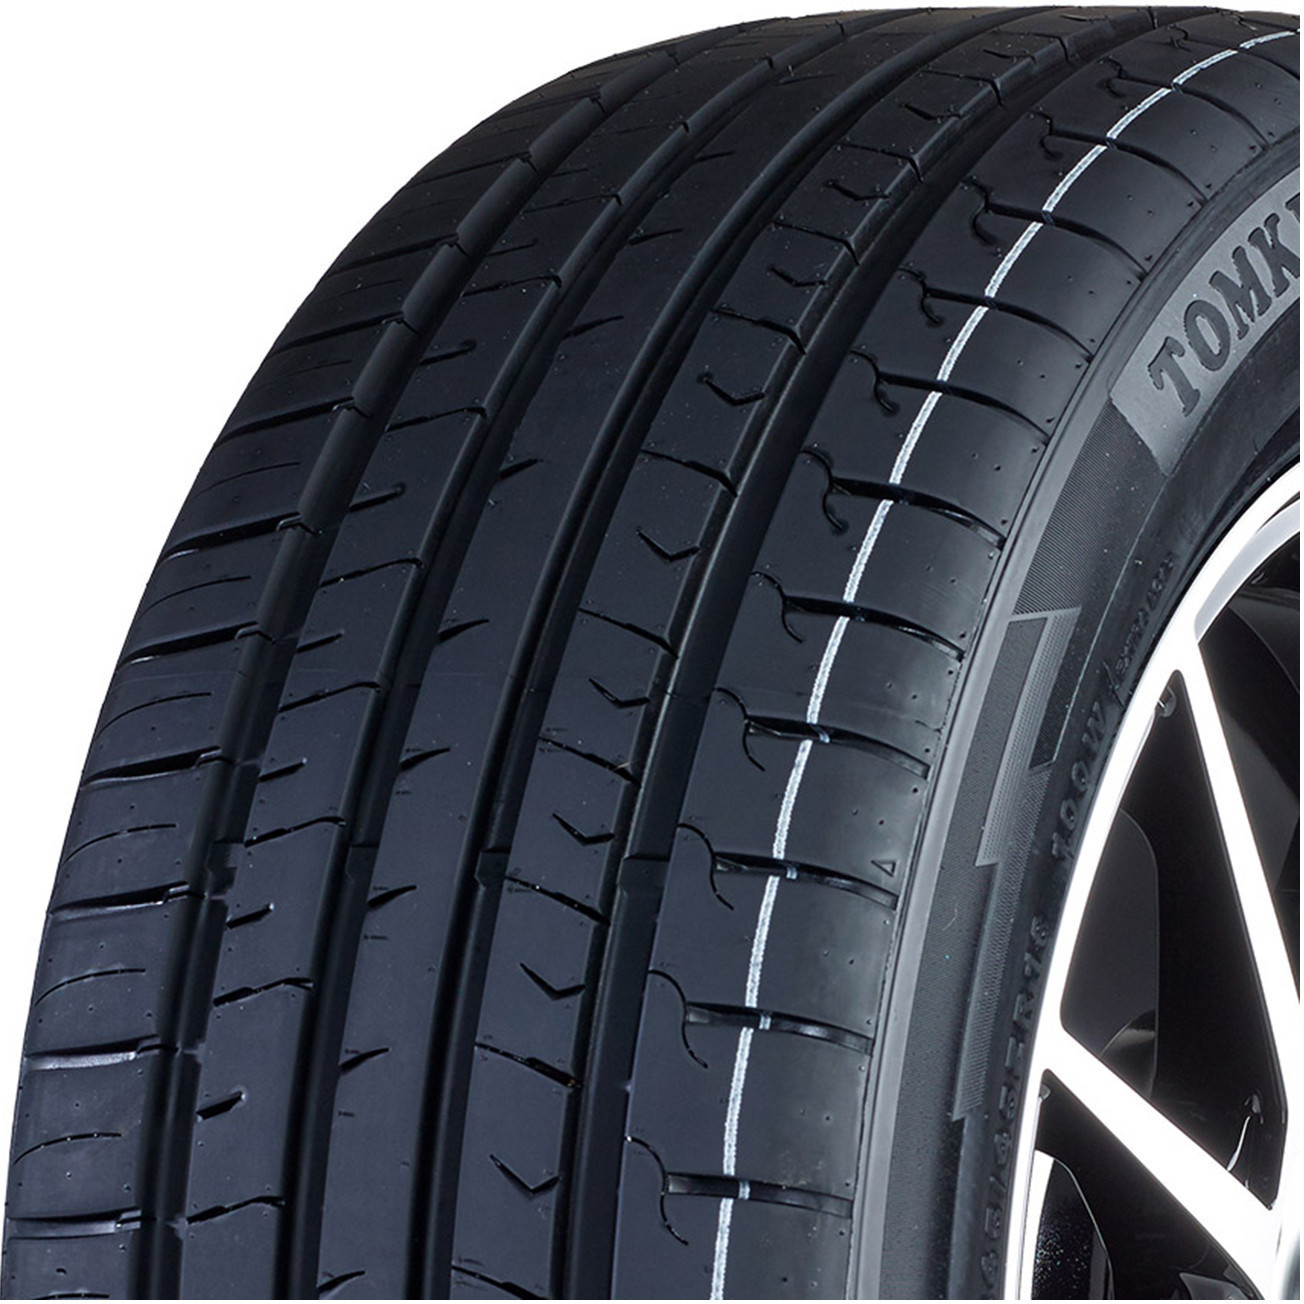 Tomket and Tyres Life extend partnership